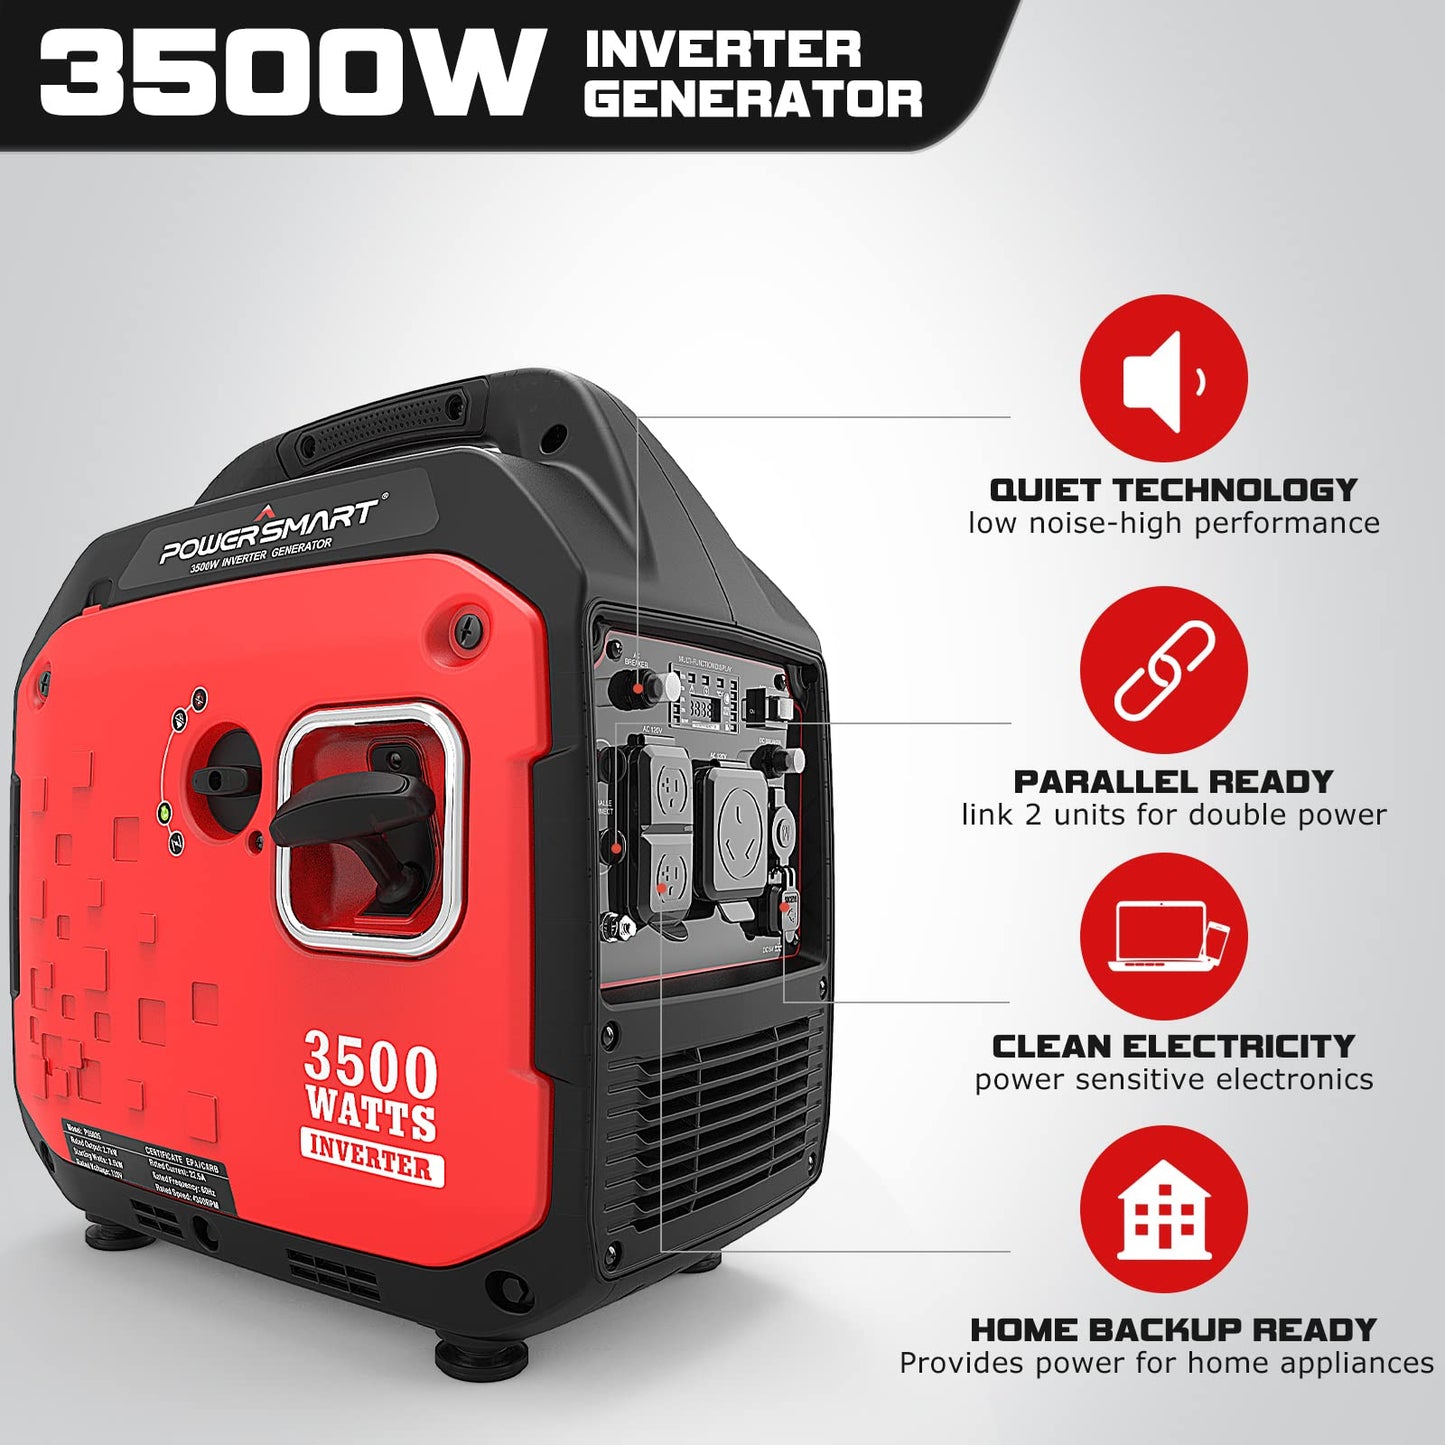 PowerSmart 3500-Watt Portable Inverter Generator Gas Powered, Super Quiet Outdoor Generator RV Ready for Home Use, CARB Compliant PS5035 3500 Watts